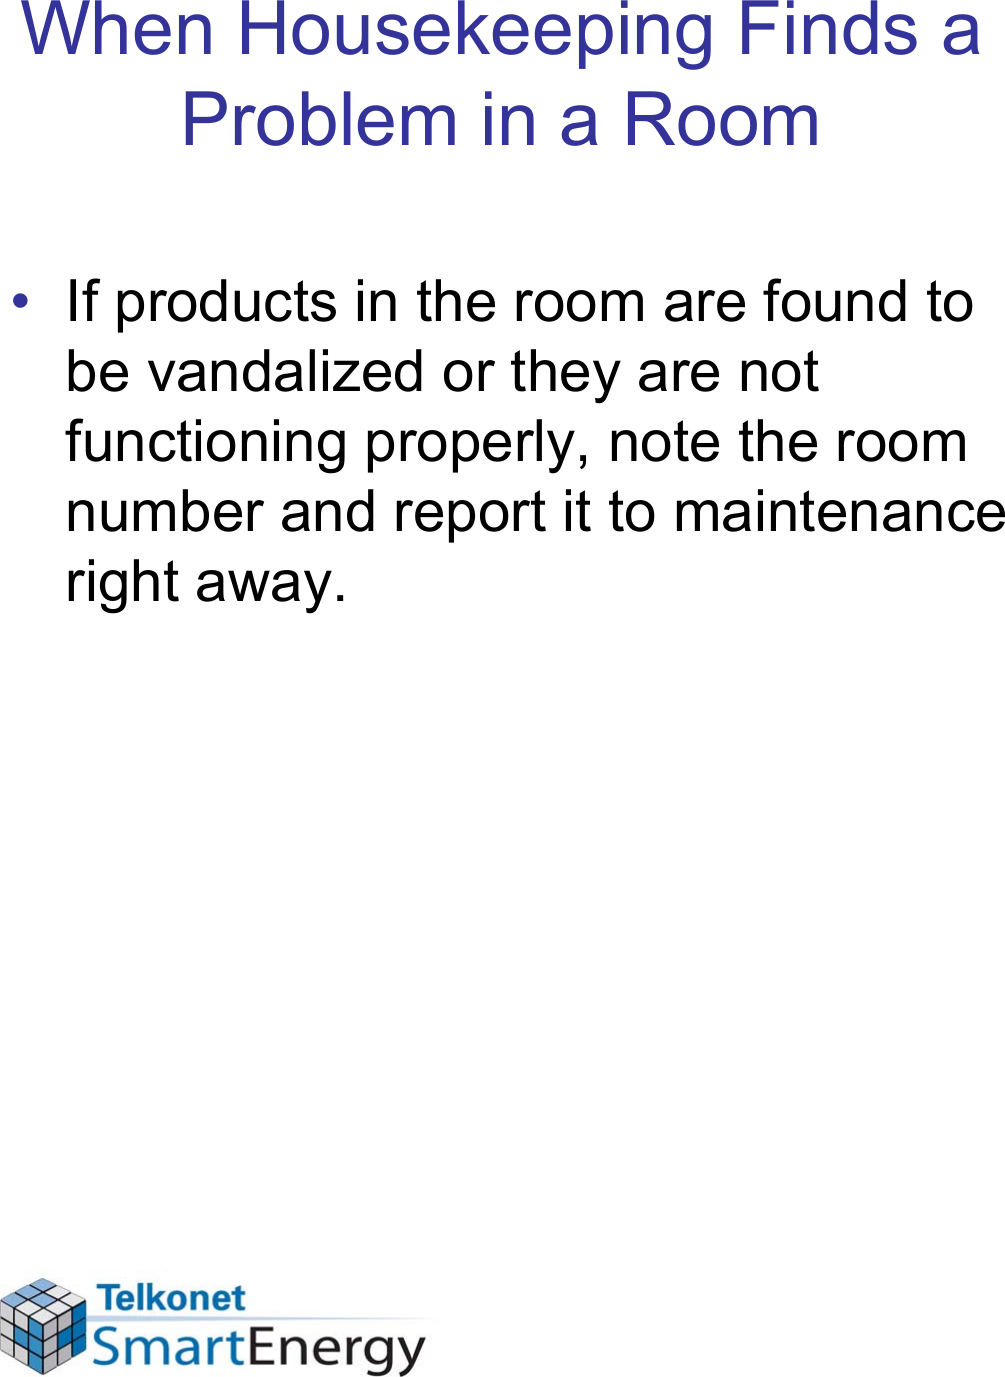 When Housekeeping Finds a Problem in a Room• If products in the room are found to be vandalized or they are not functioning properly, note the room number and report it to maintenance right away.